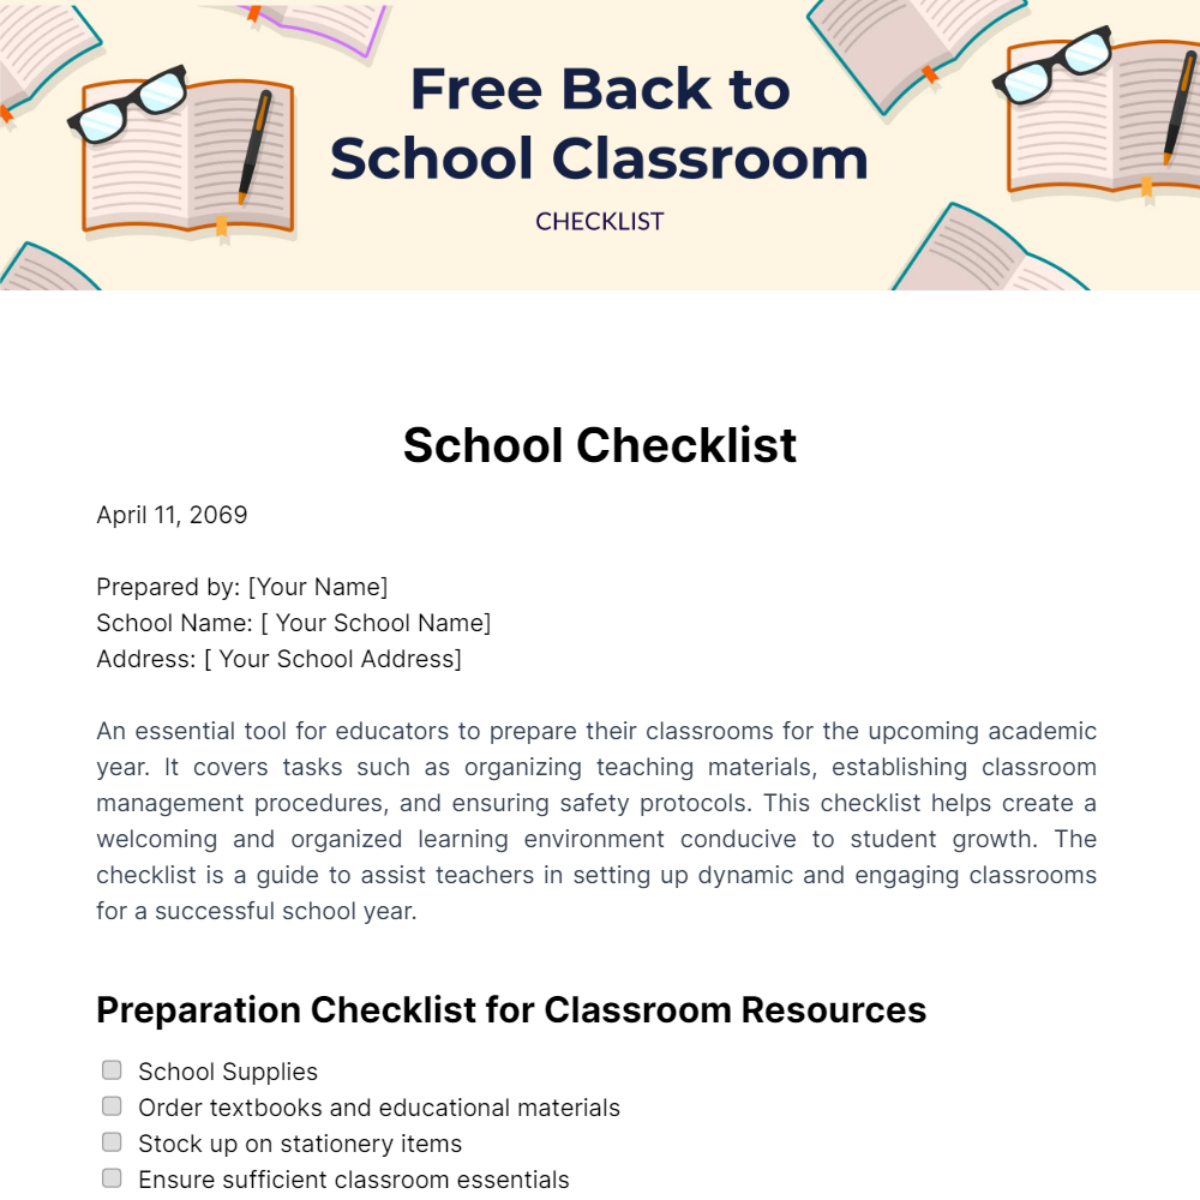 Free Back to School Classroom Checklist Template